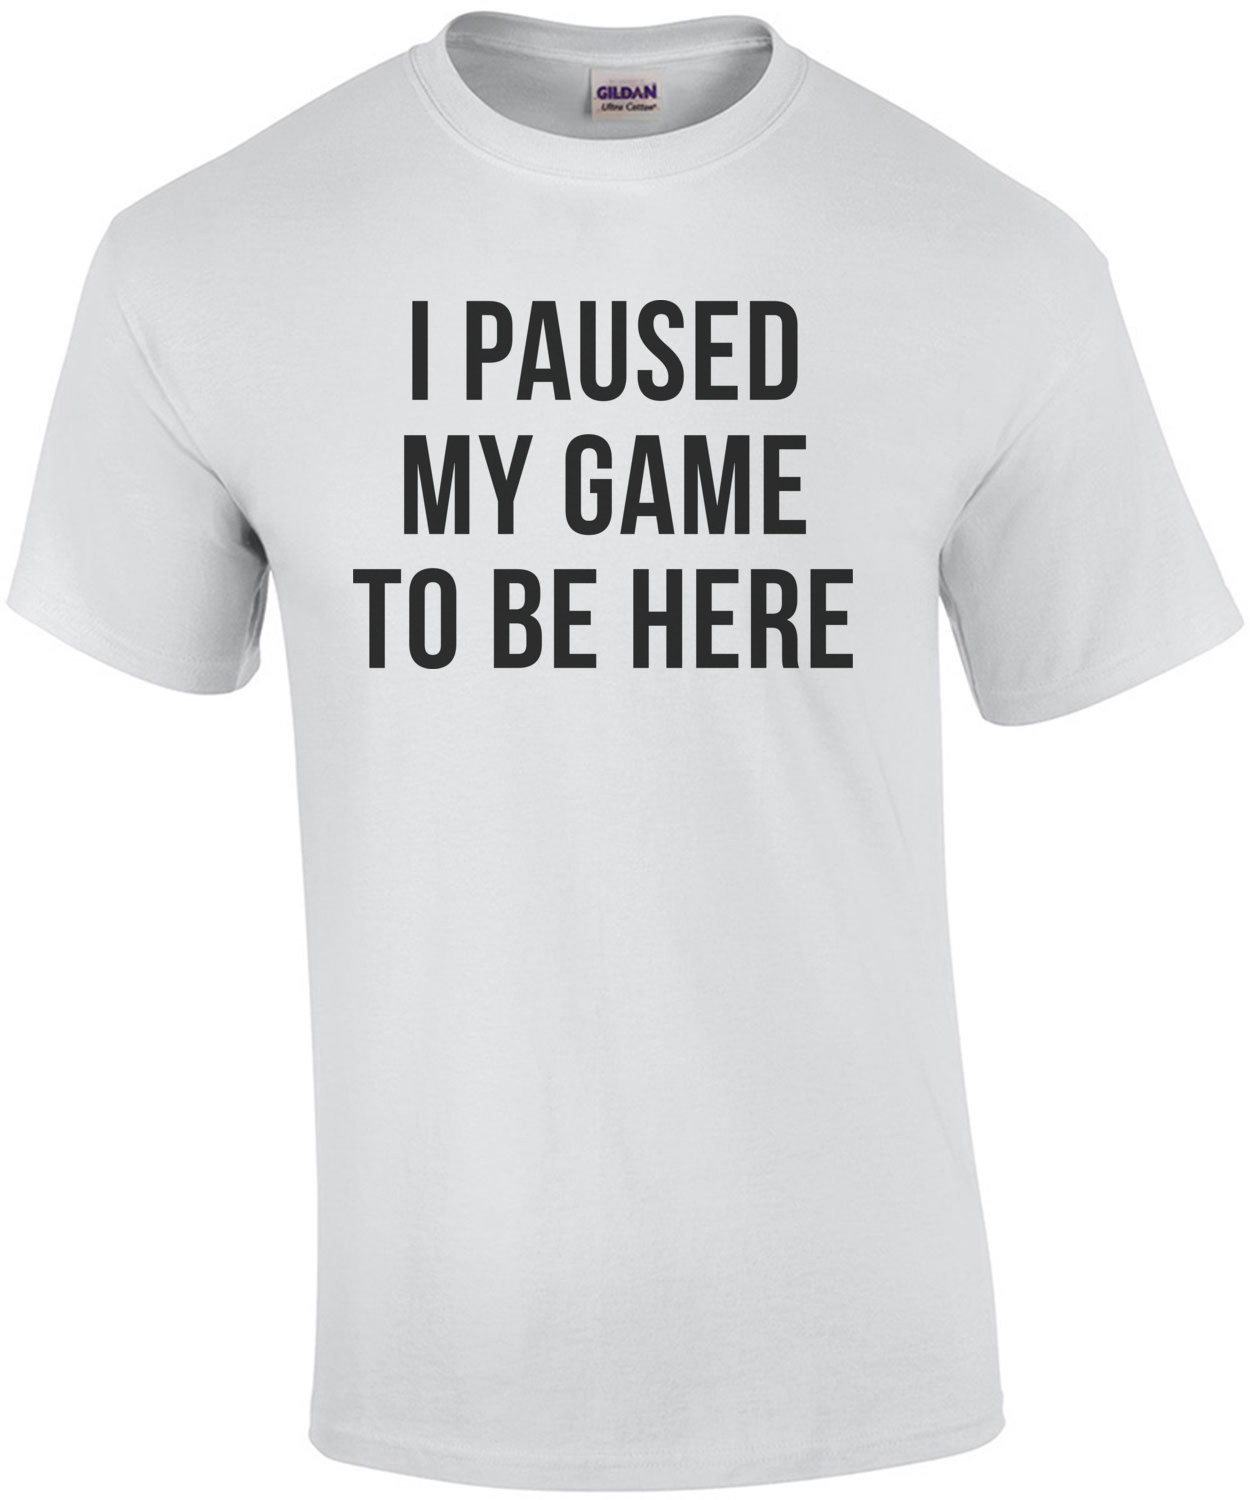 I Paused My Game To Be Here Funny Gaming Shirt